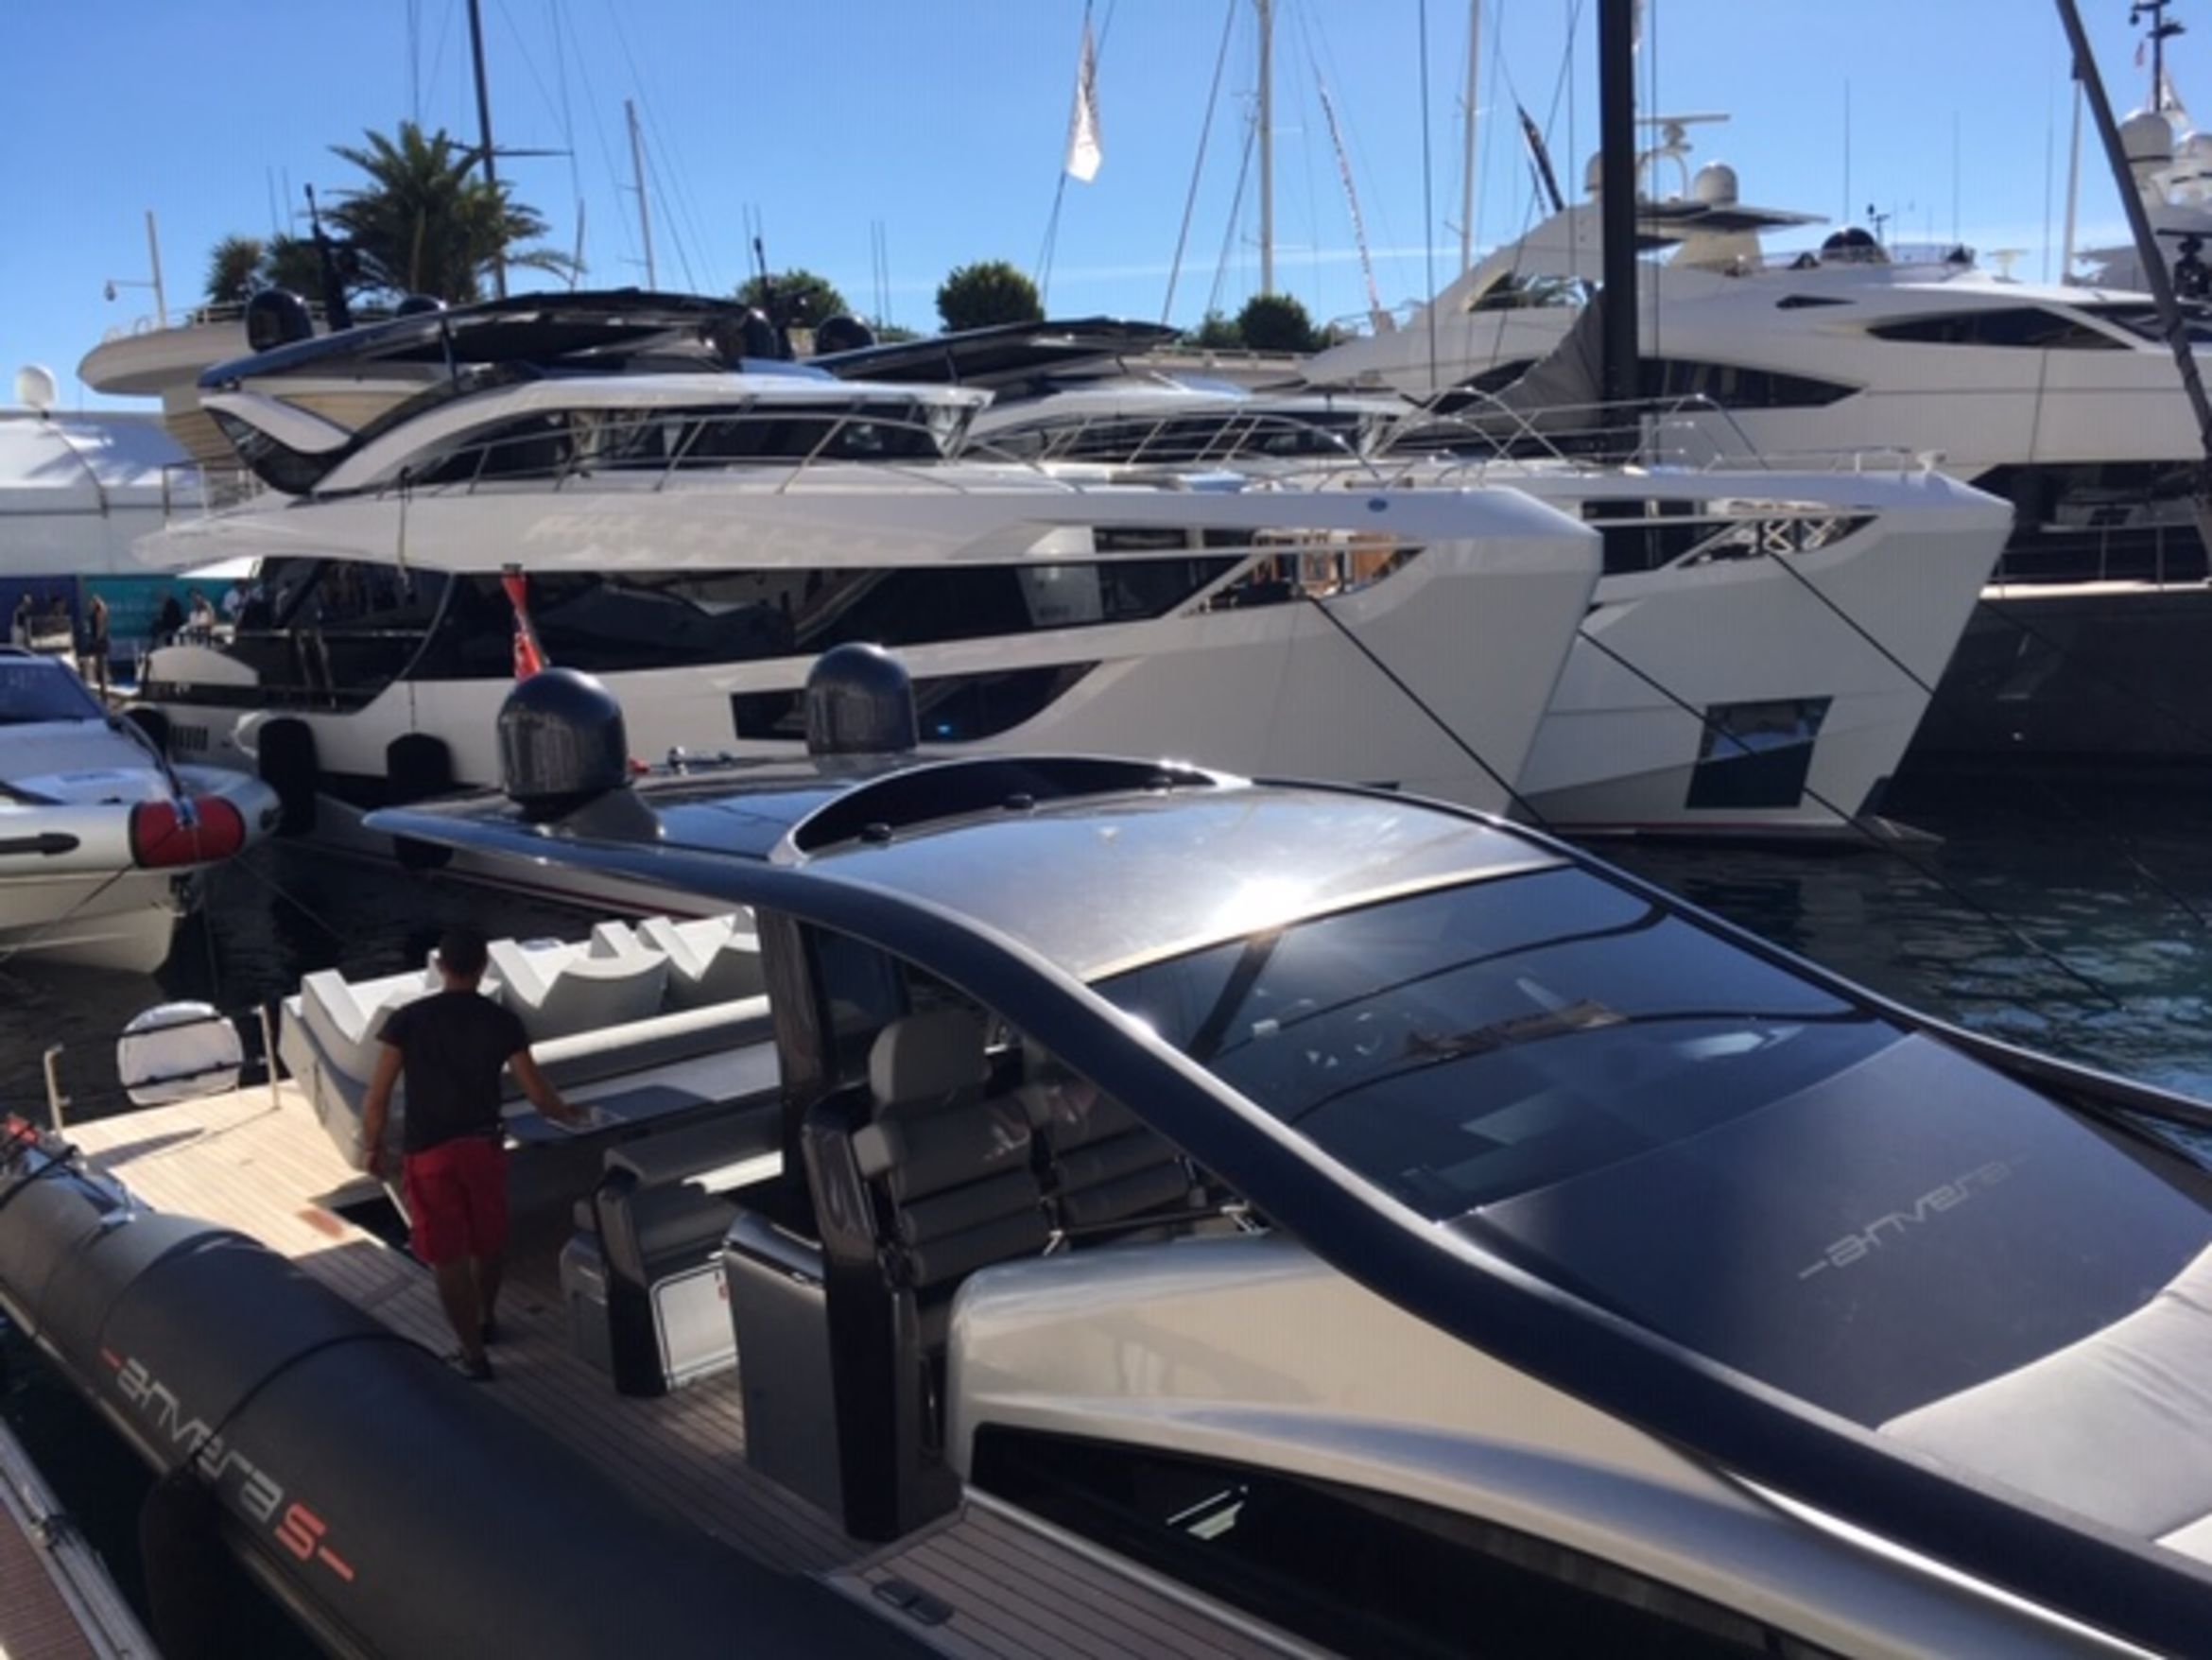 Superyachts at the Monaco Yacht Show 2019